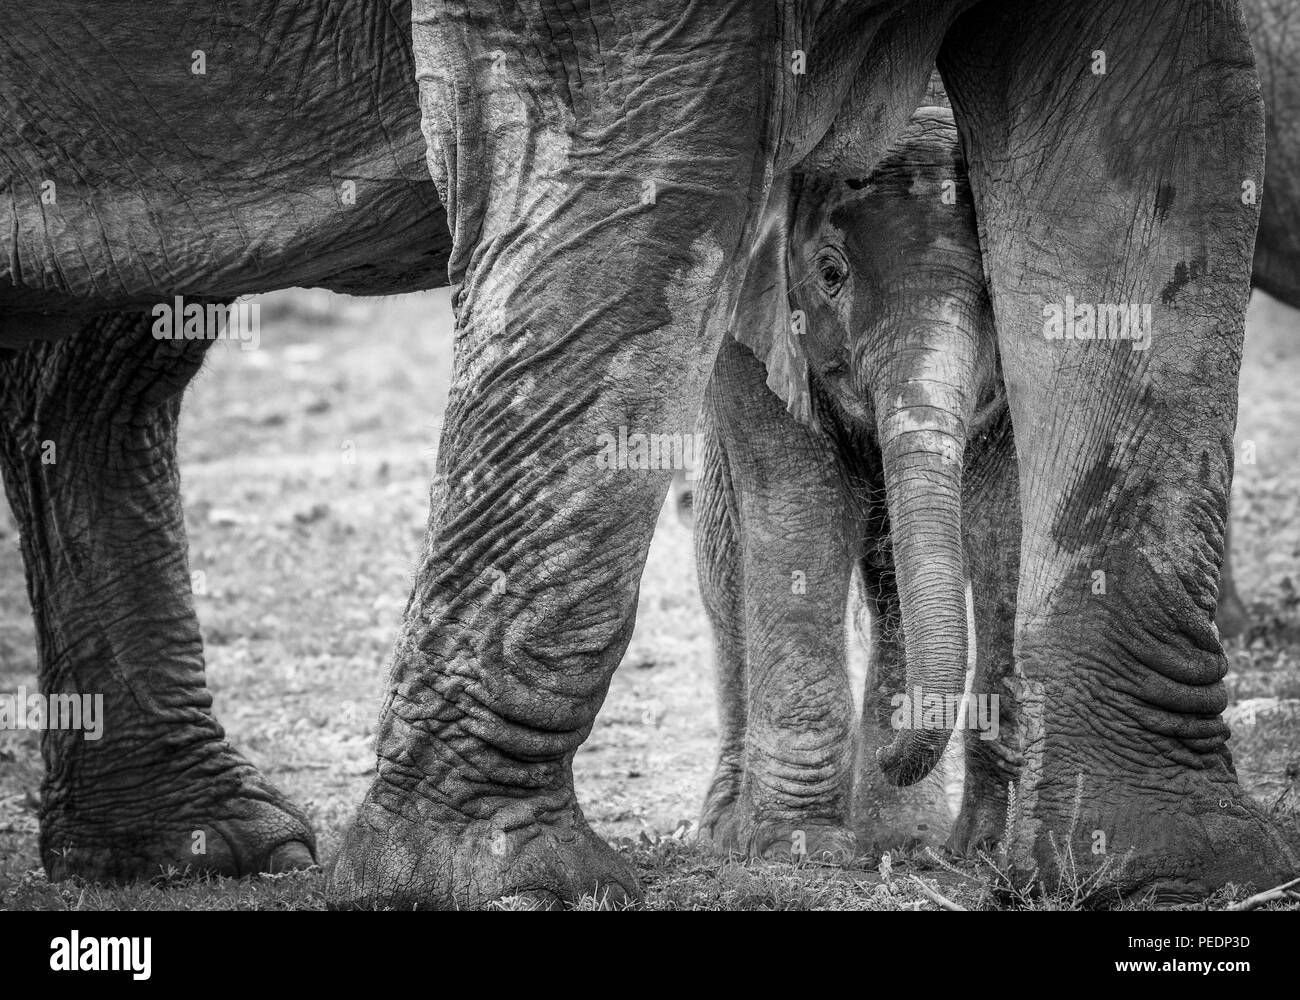 A baby elephant peeks out from under his mother's legs. Stock Photo